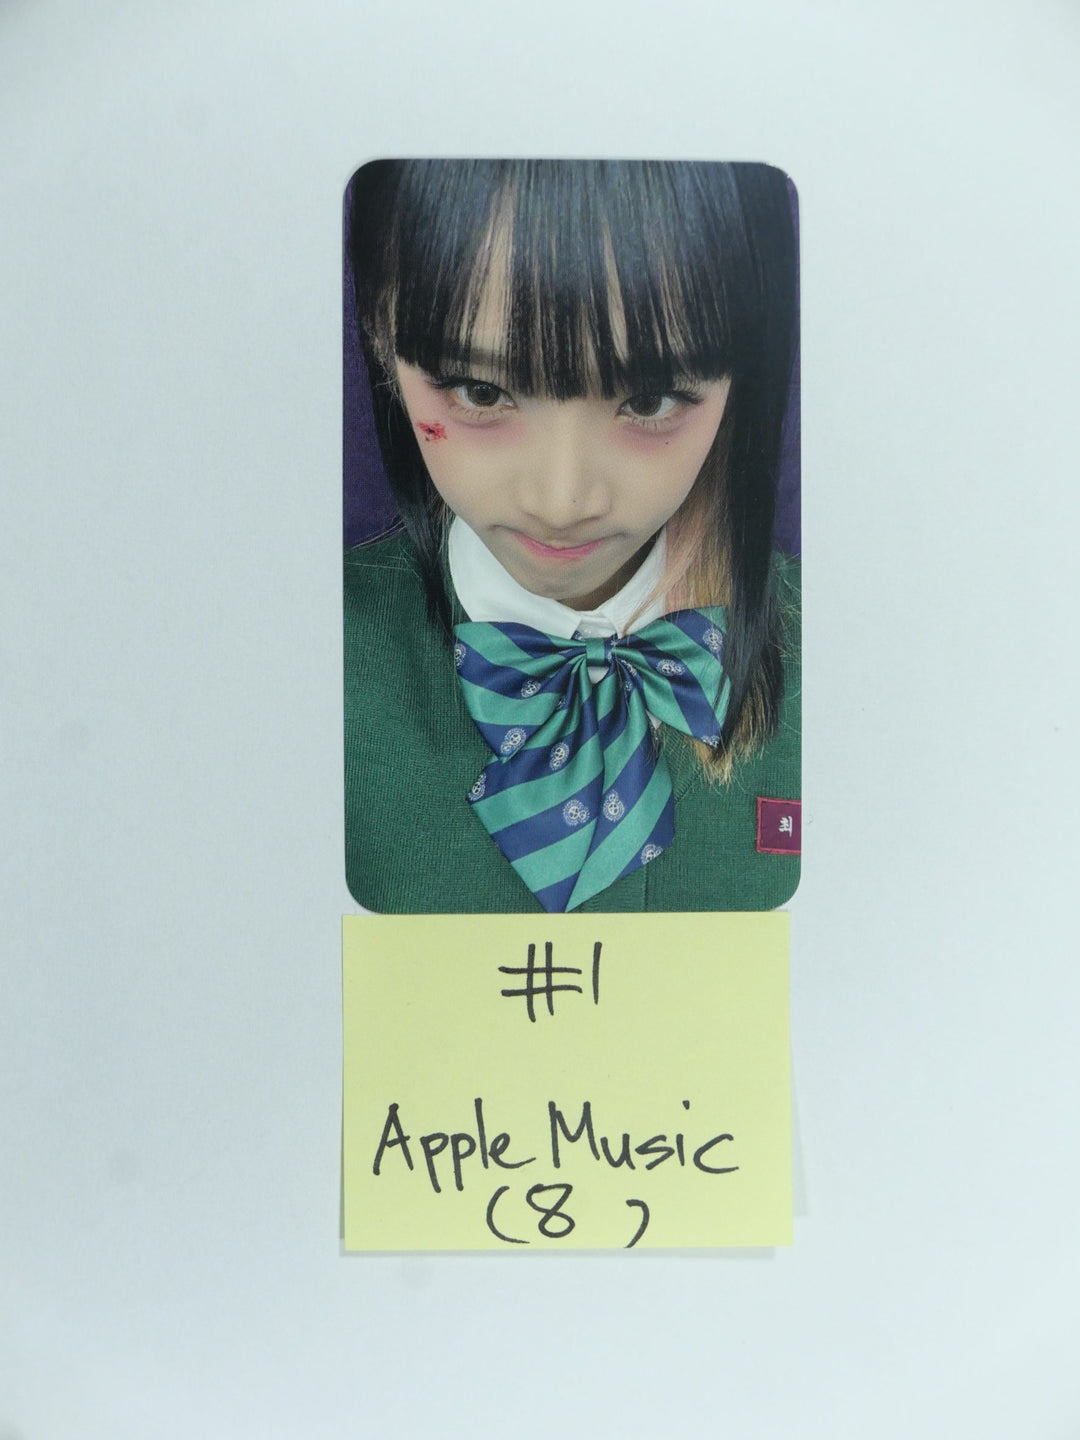 YENA "ˣ‿ˣ (SMiLEY)" - Apple Music Fansign Event Photocard Round 2